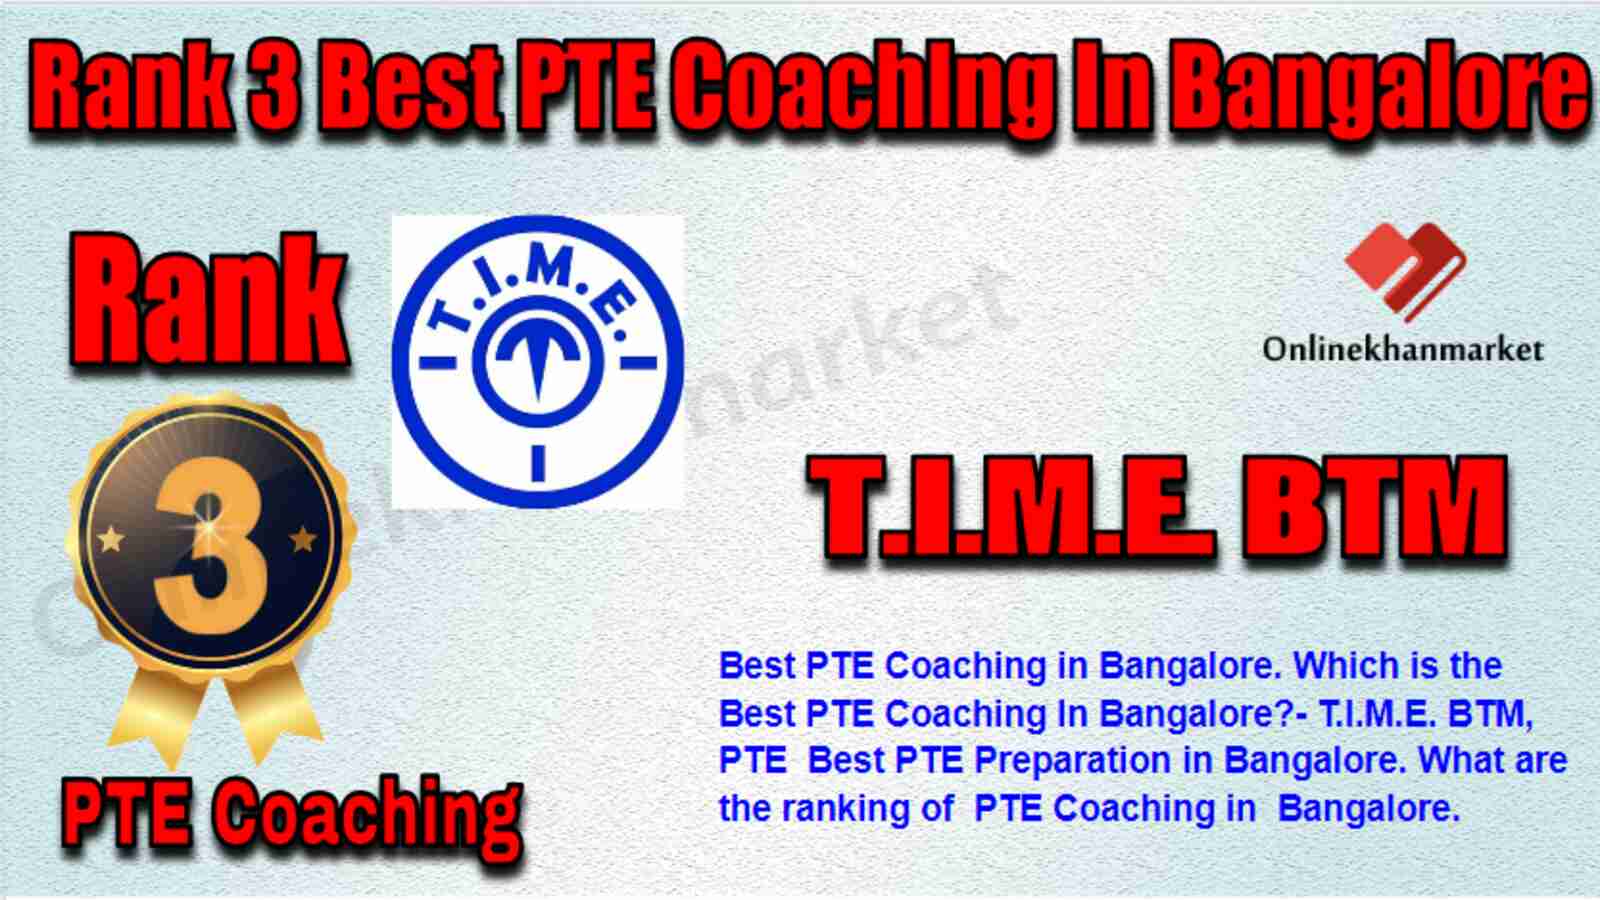 Rank 3 Best PTE Coaching in Bangalore